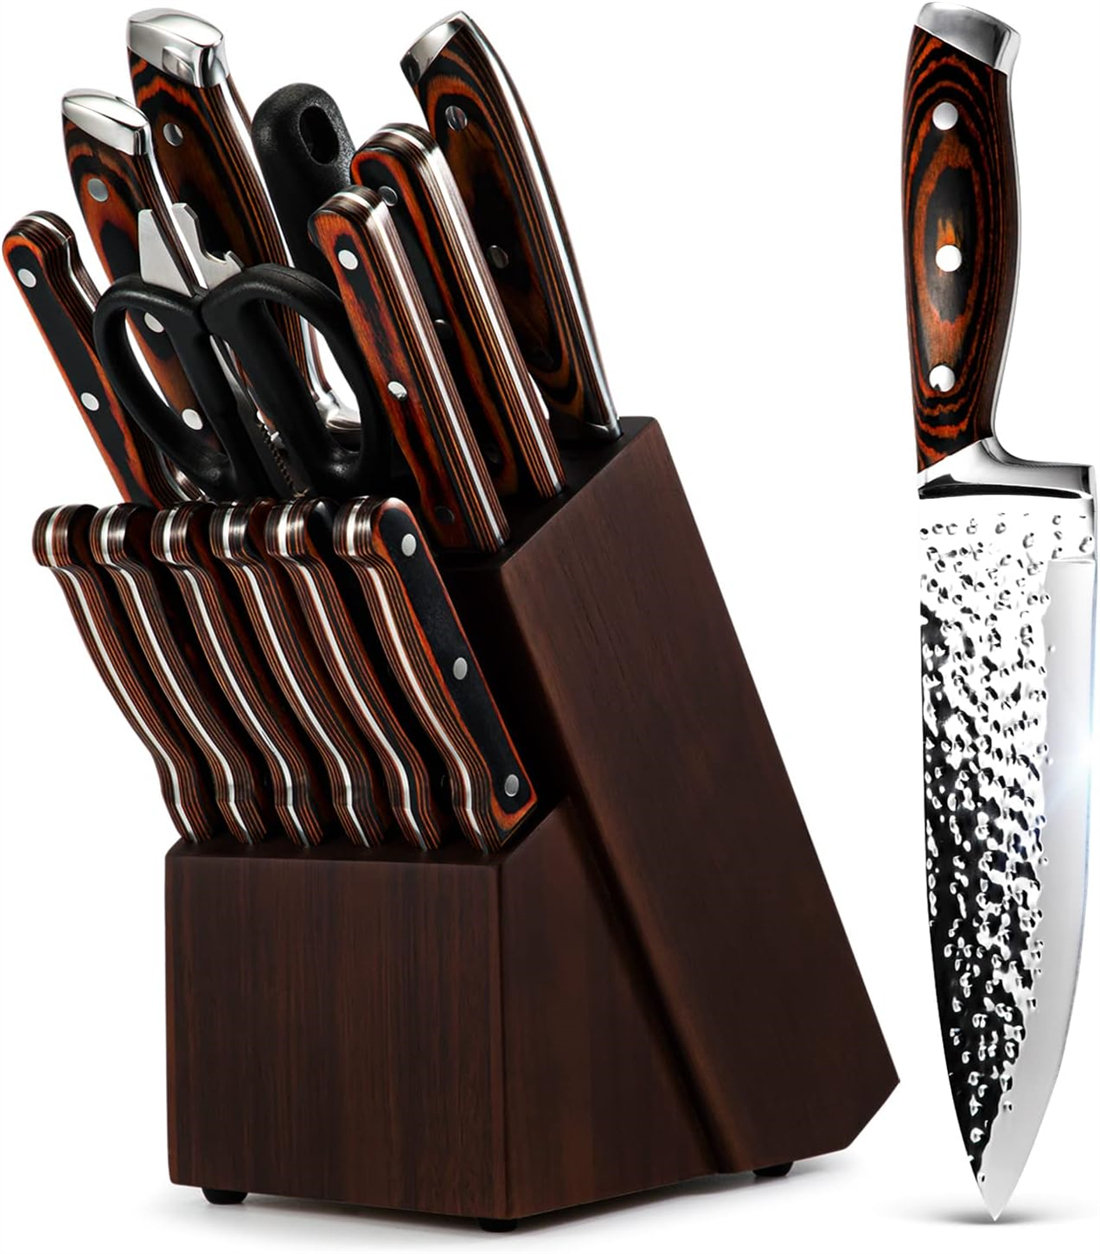 Styled Settings Copper Knife Set with Sharpening Block 